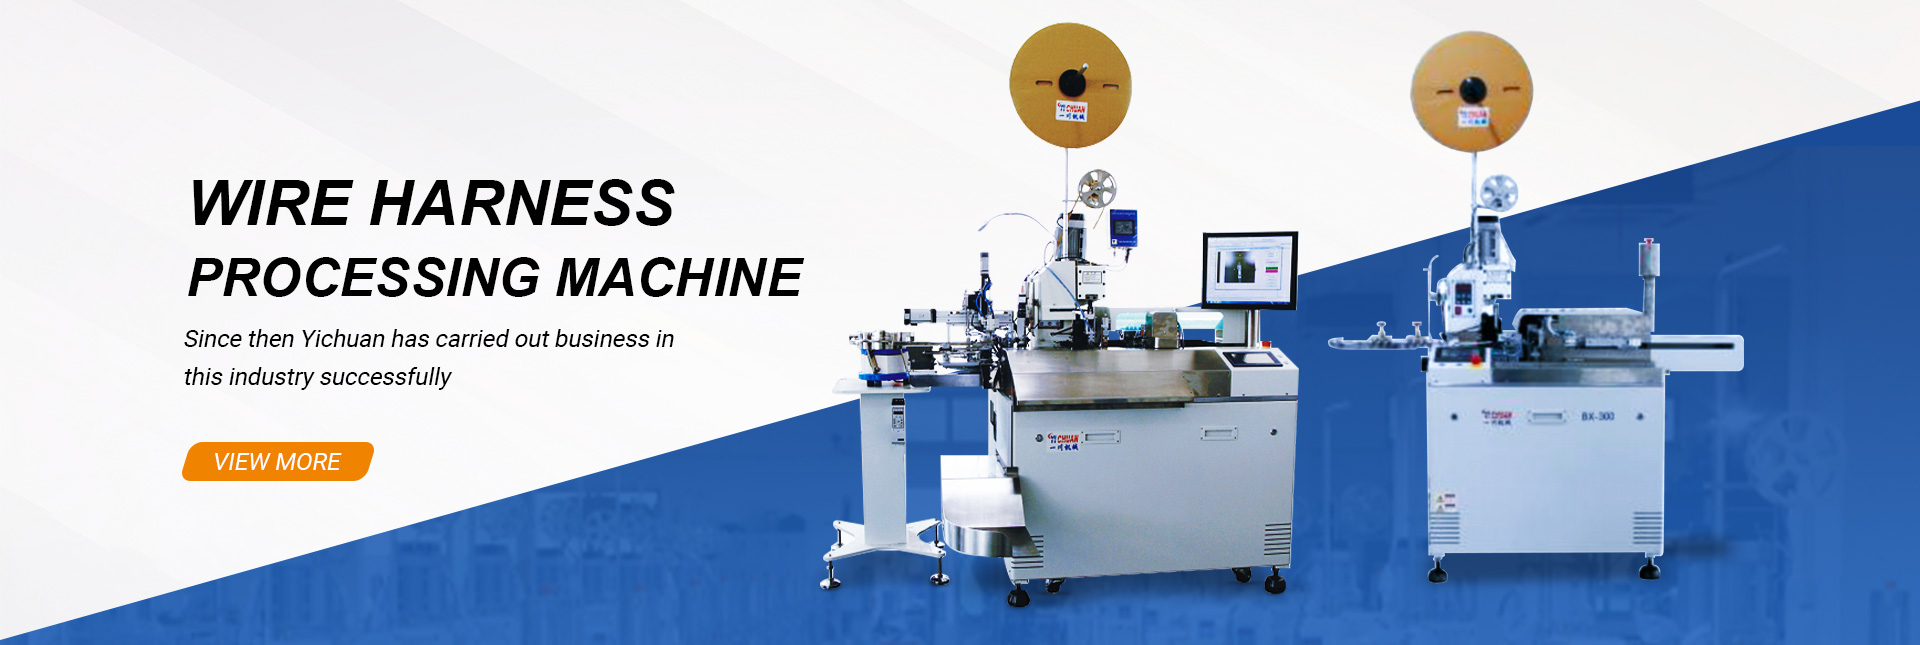 WIRE HARNESS PROCESSING MACHINES